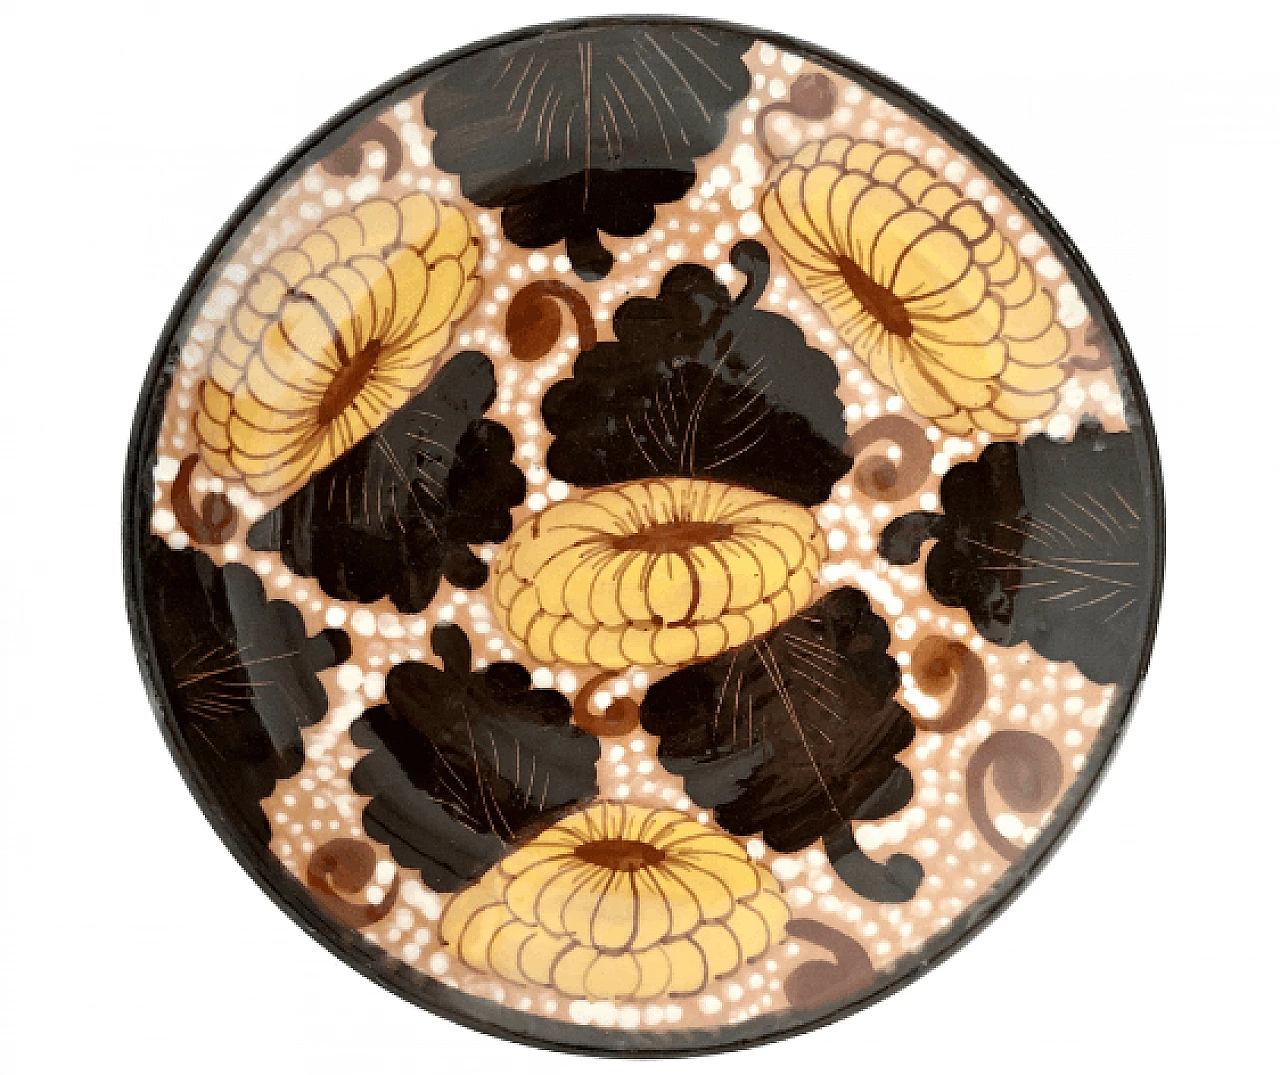 Glazed and painted terracotta decorative plate, 1920s 1